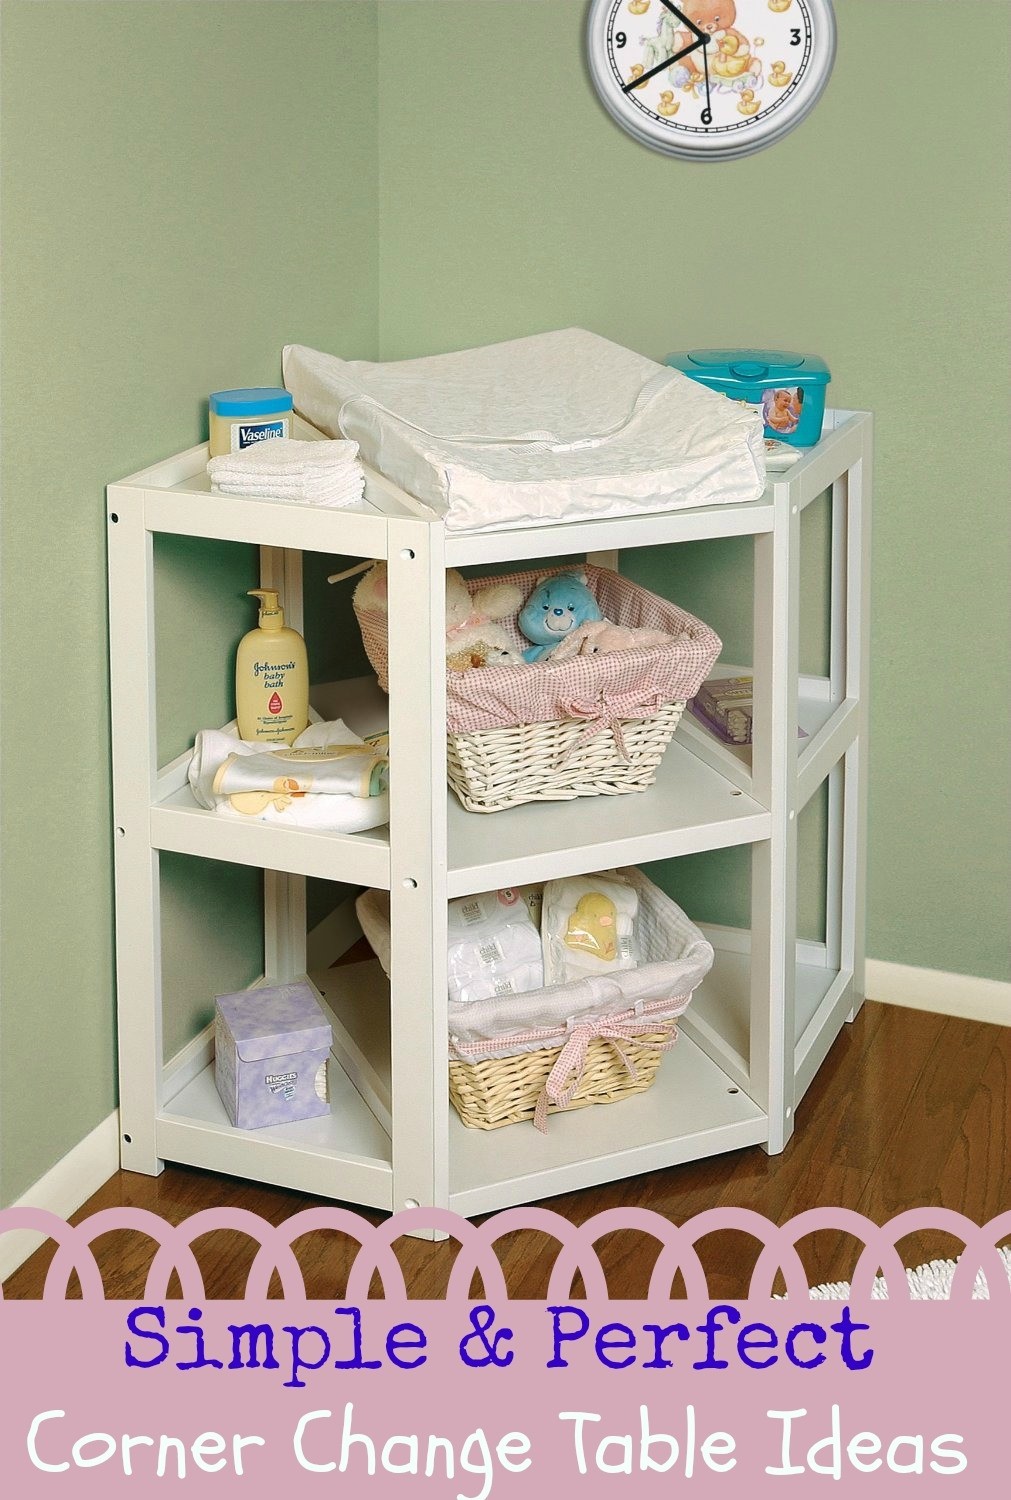 Collapsible Changing Table Ideas On Foter